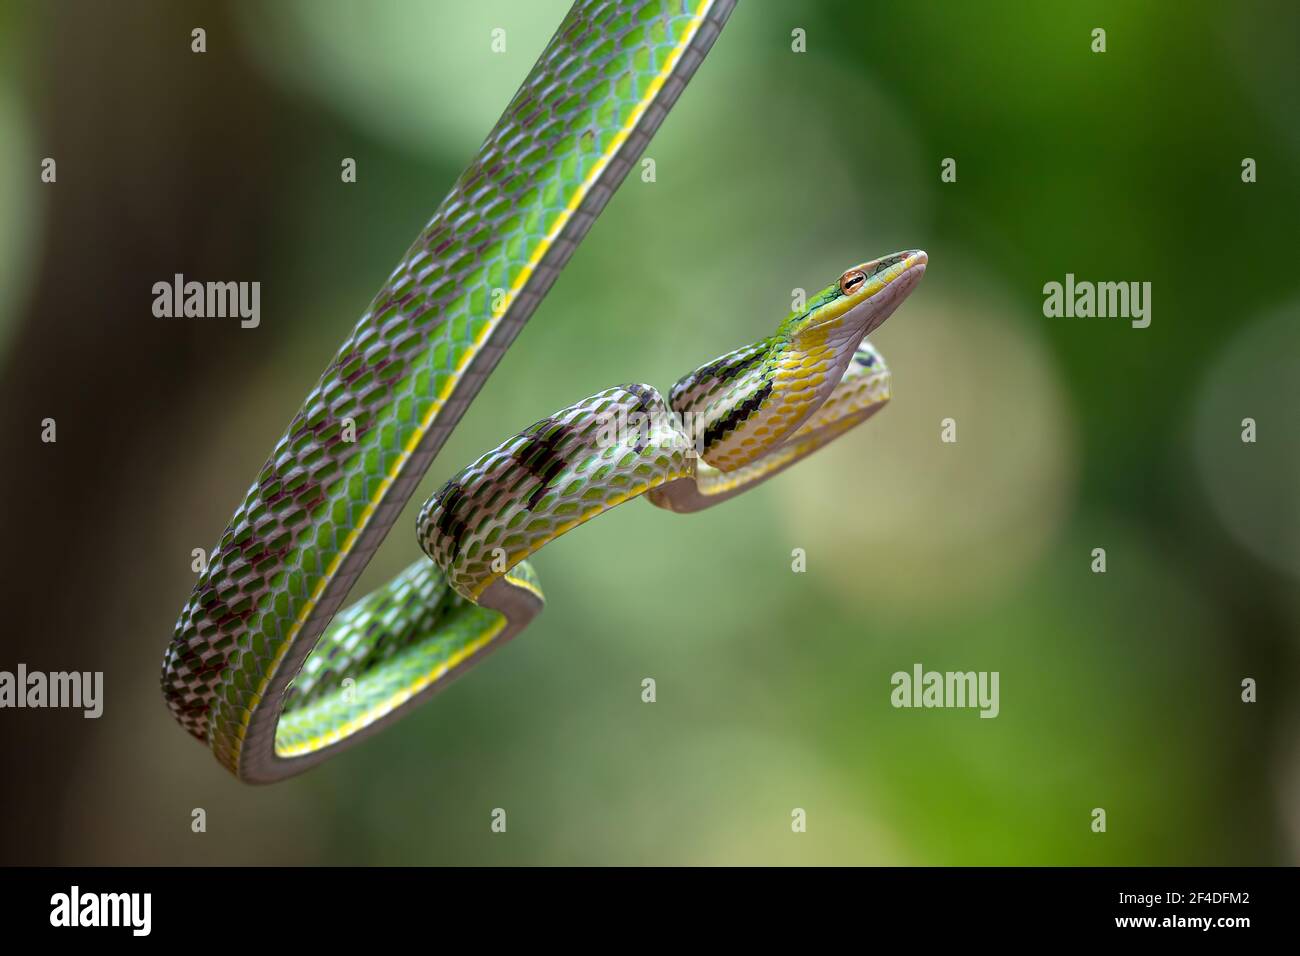 Close-up of an Asian vine snake on a branch, Indonesia Stock Photo